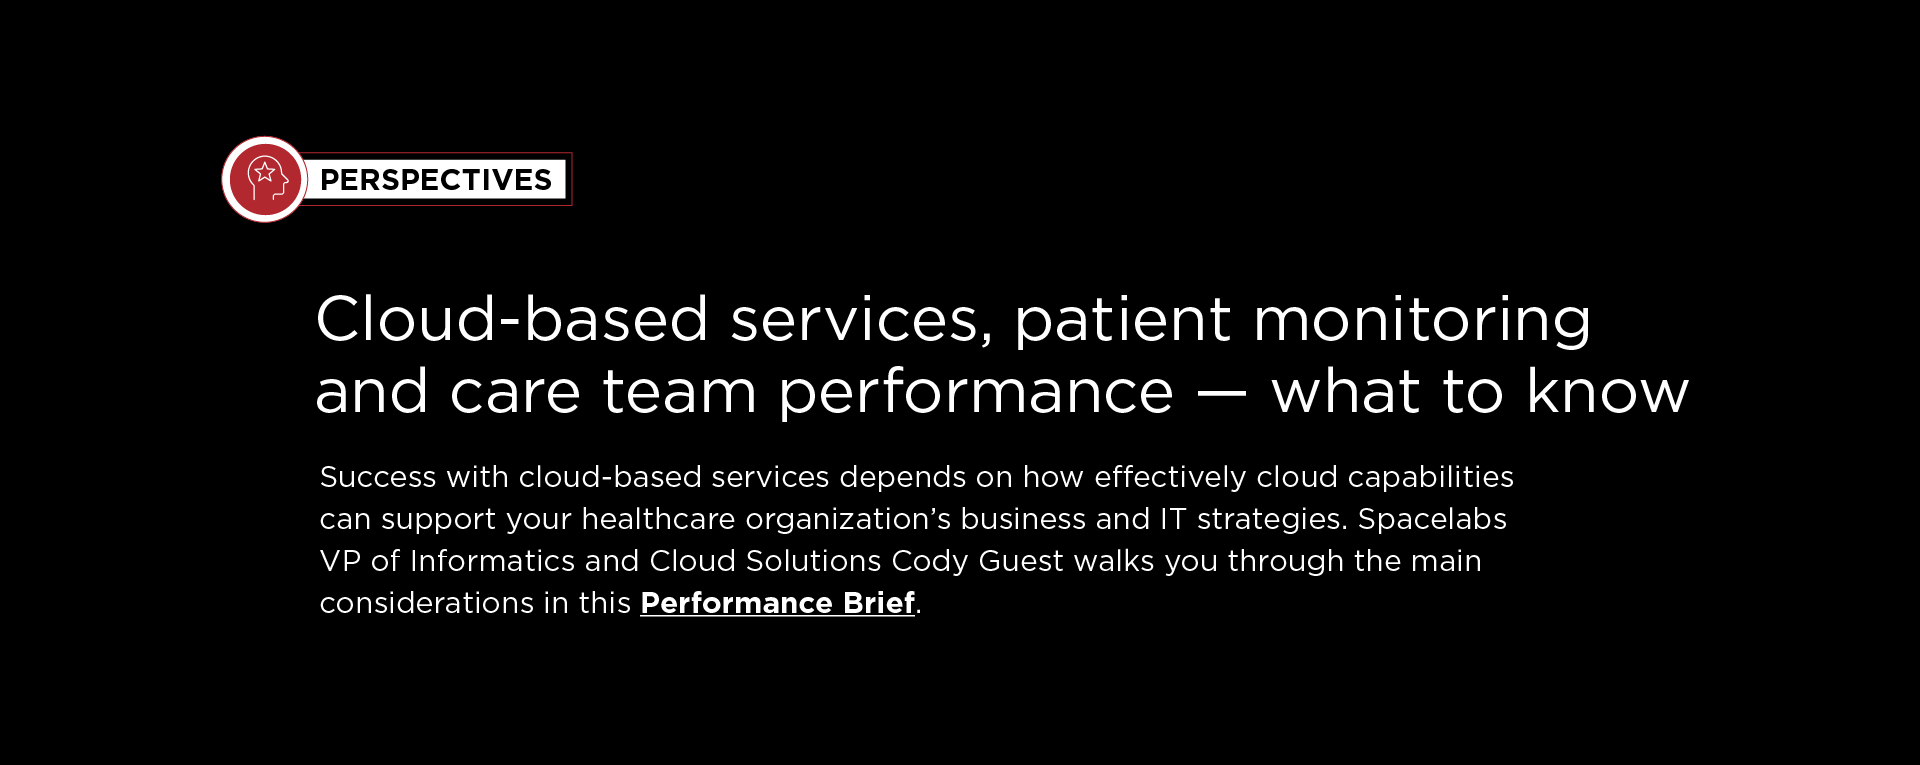 Cloud-based Services, patient monitoring, and care team performance